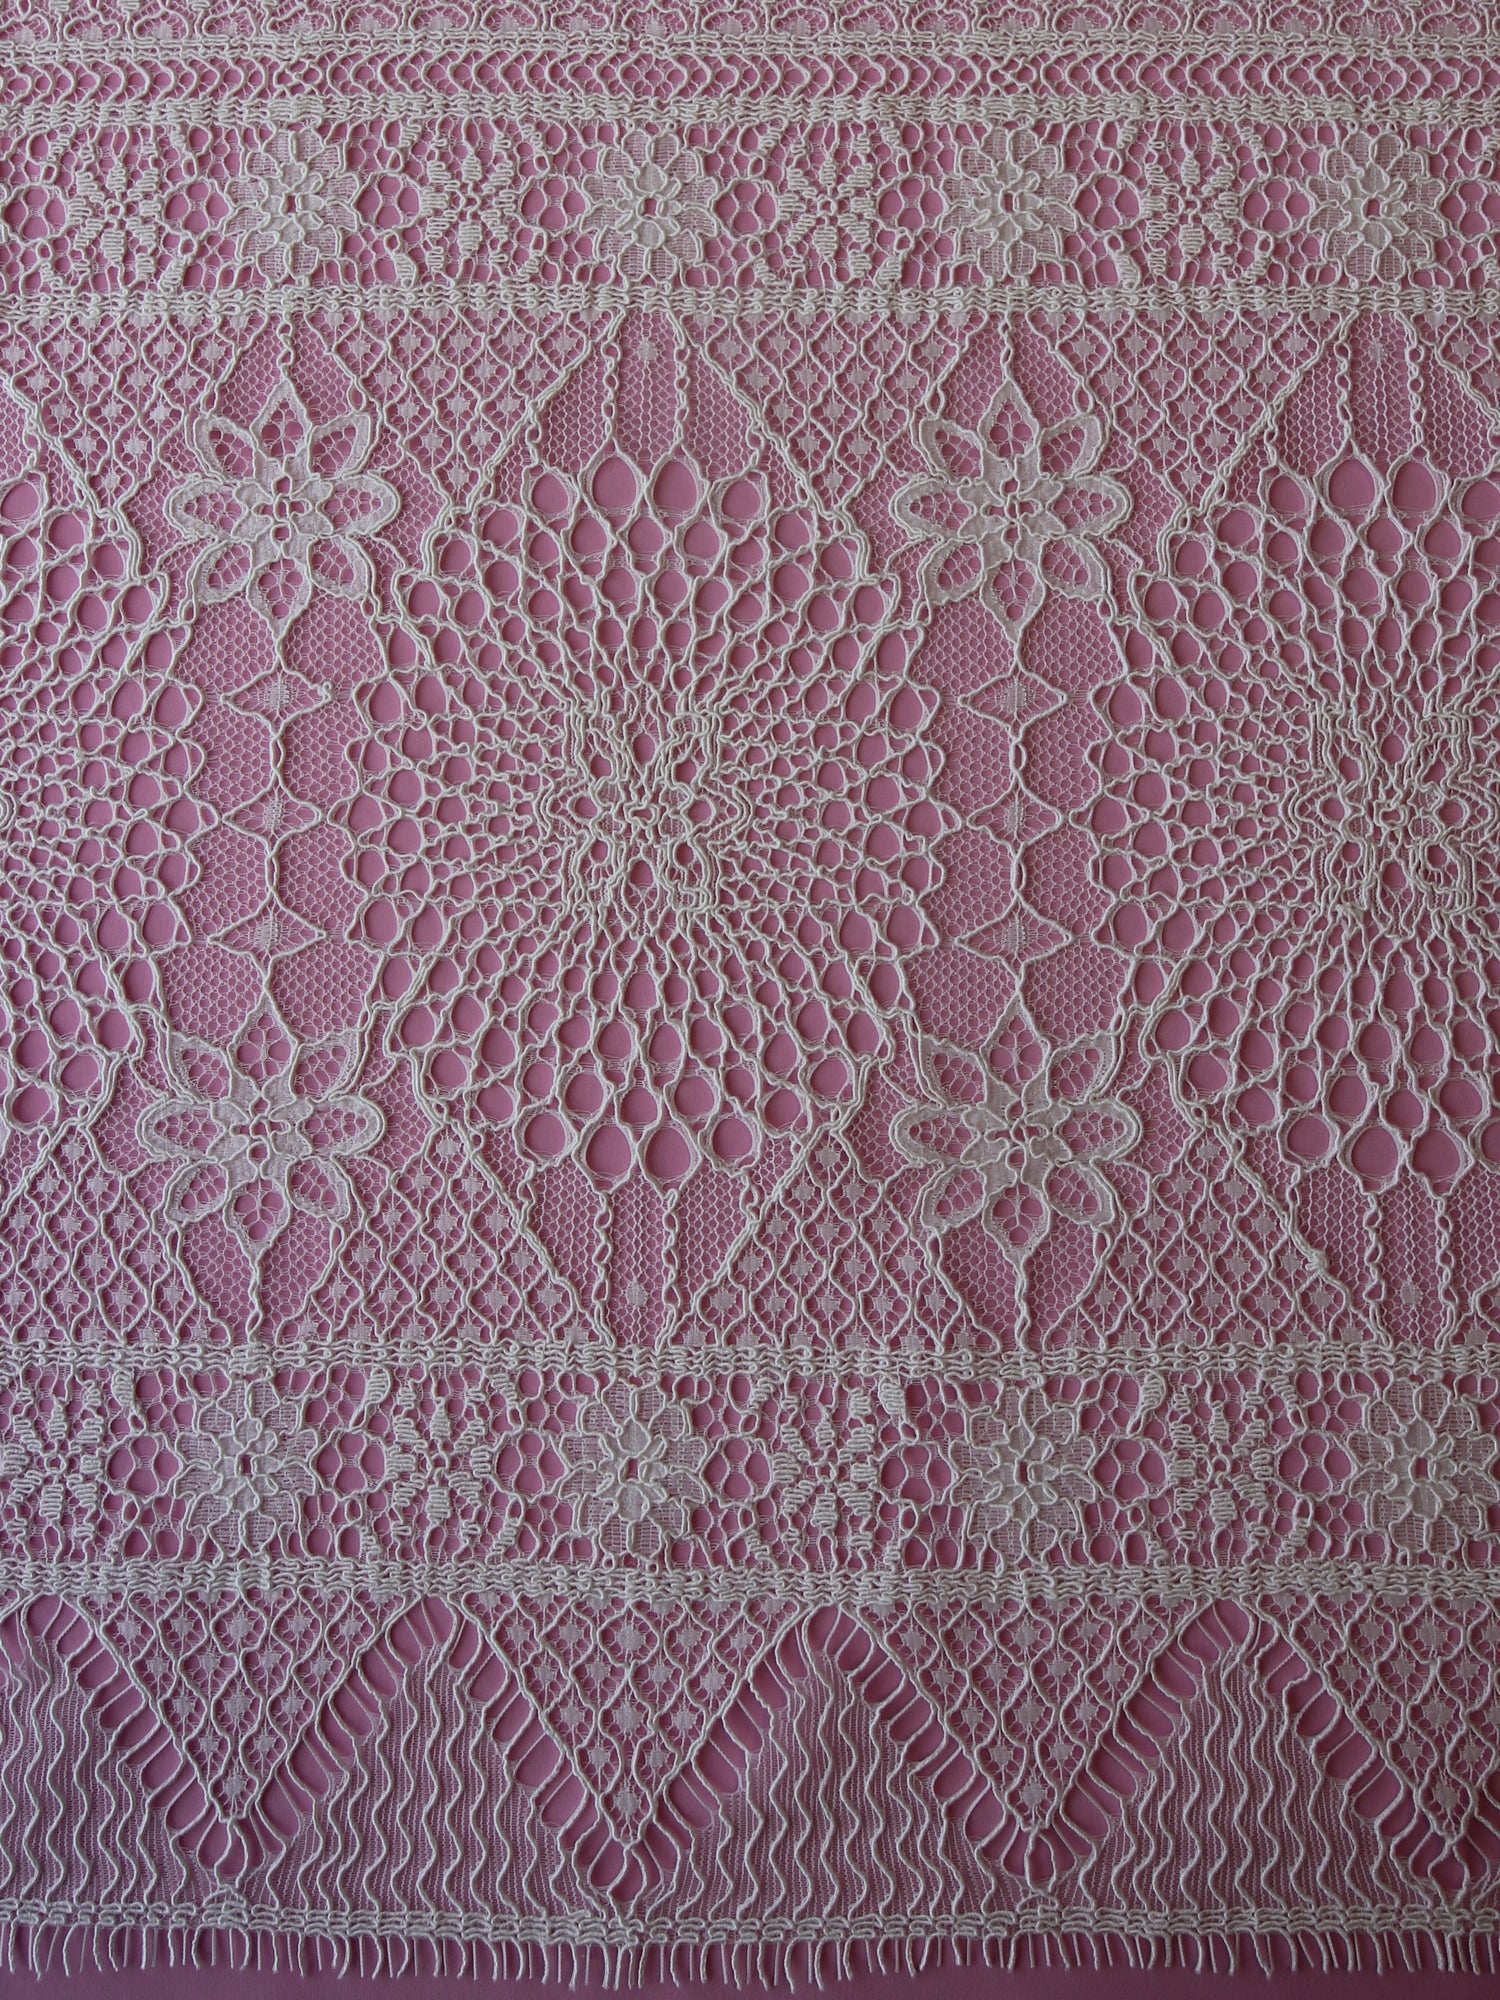 New Lace Fabric: A Tempting Trio